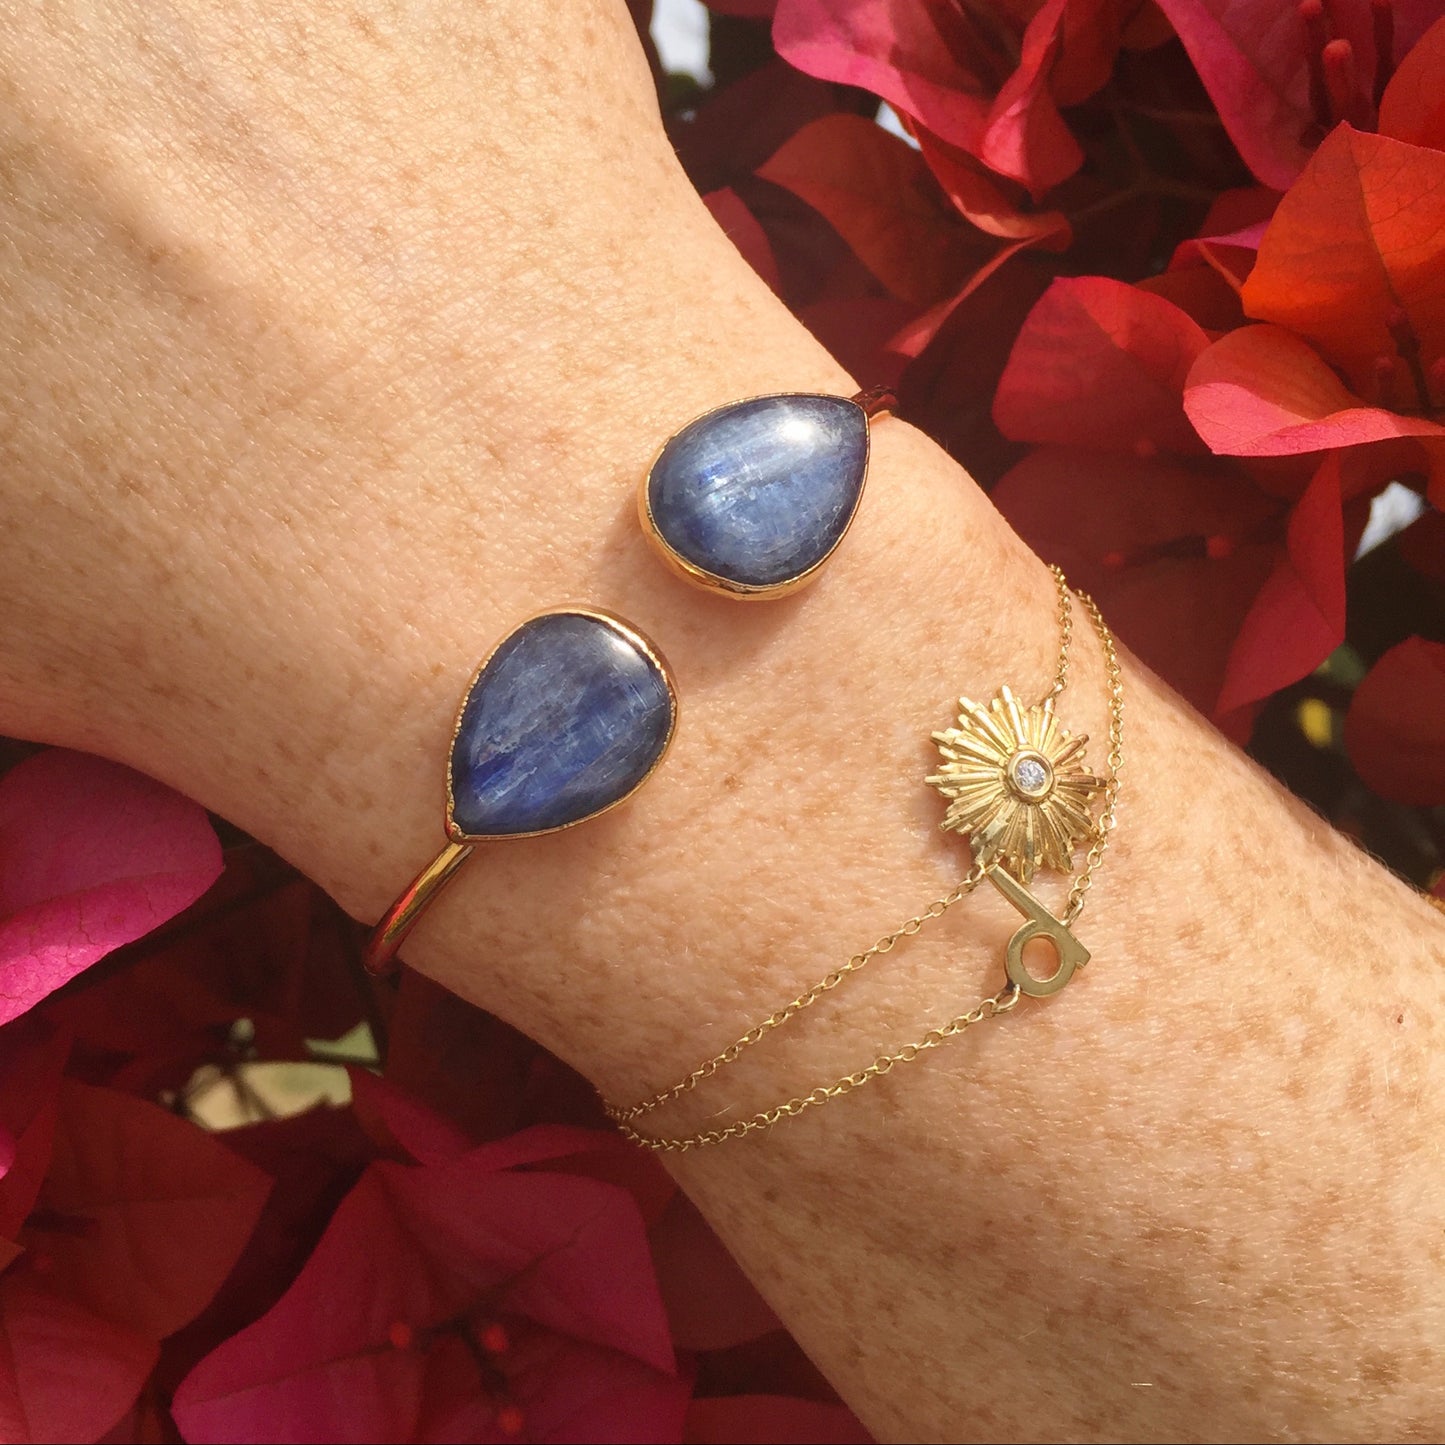 model wrist with gold starburst bracelet, d initial bracelet and kyanite cuff with bougainvillea janna Conner